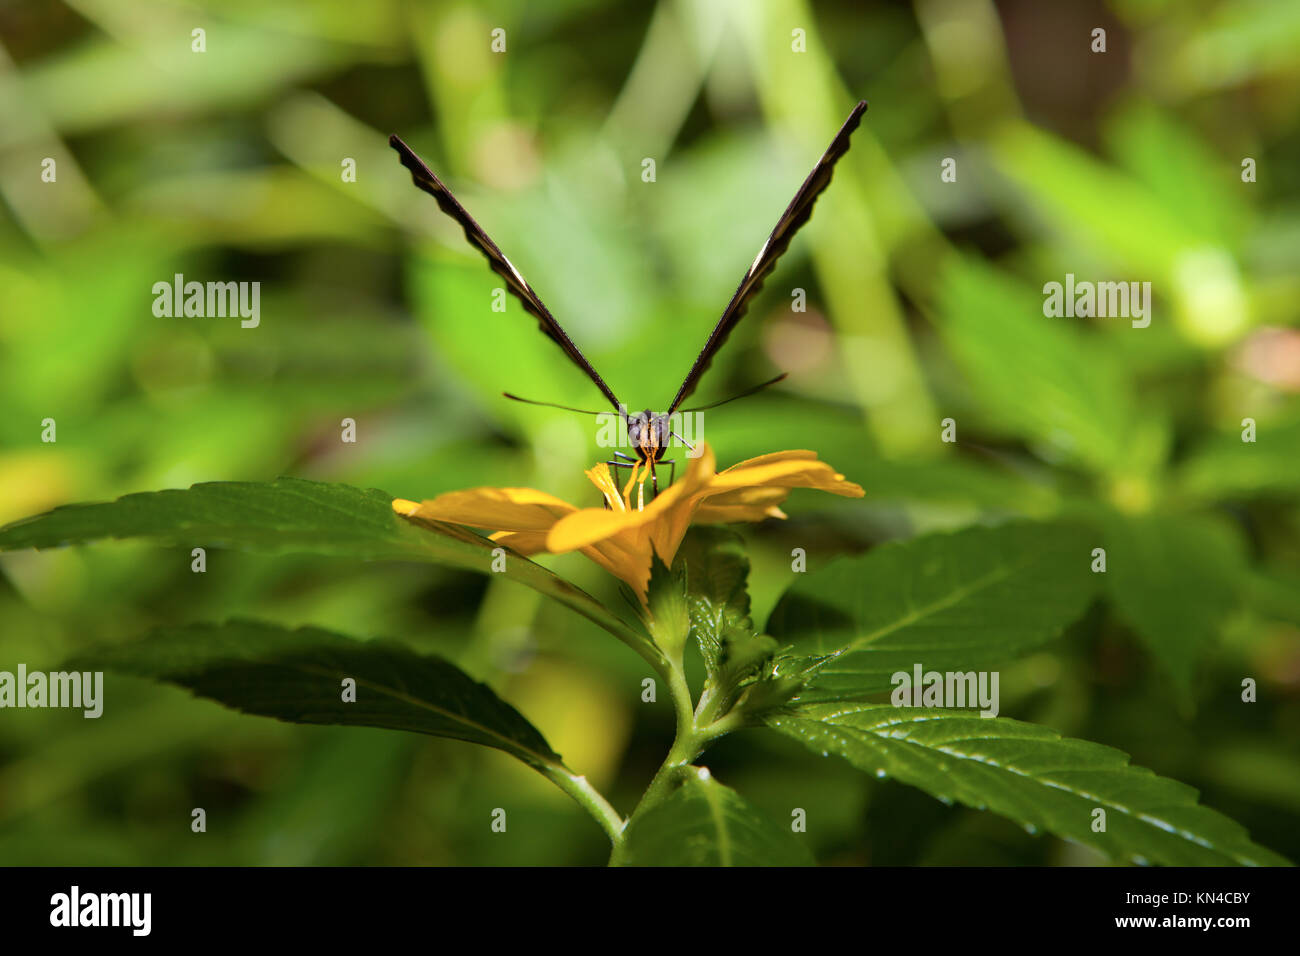 Front view closeup of a colorful butterfly over green blackground. Stock Photo